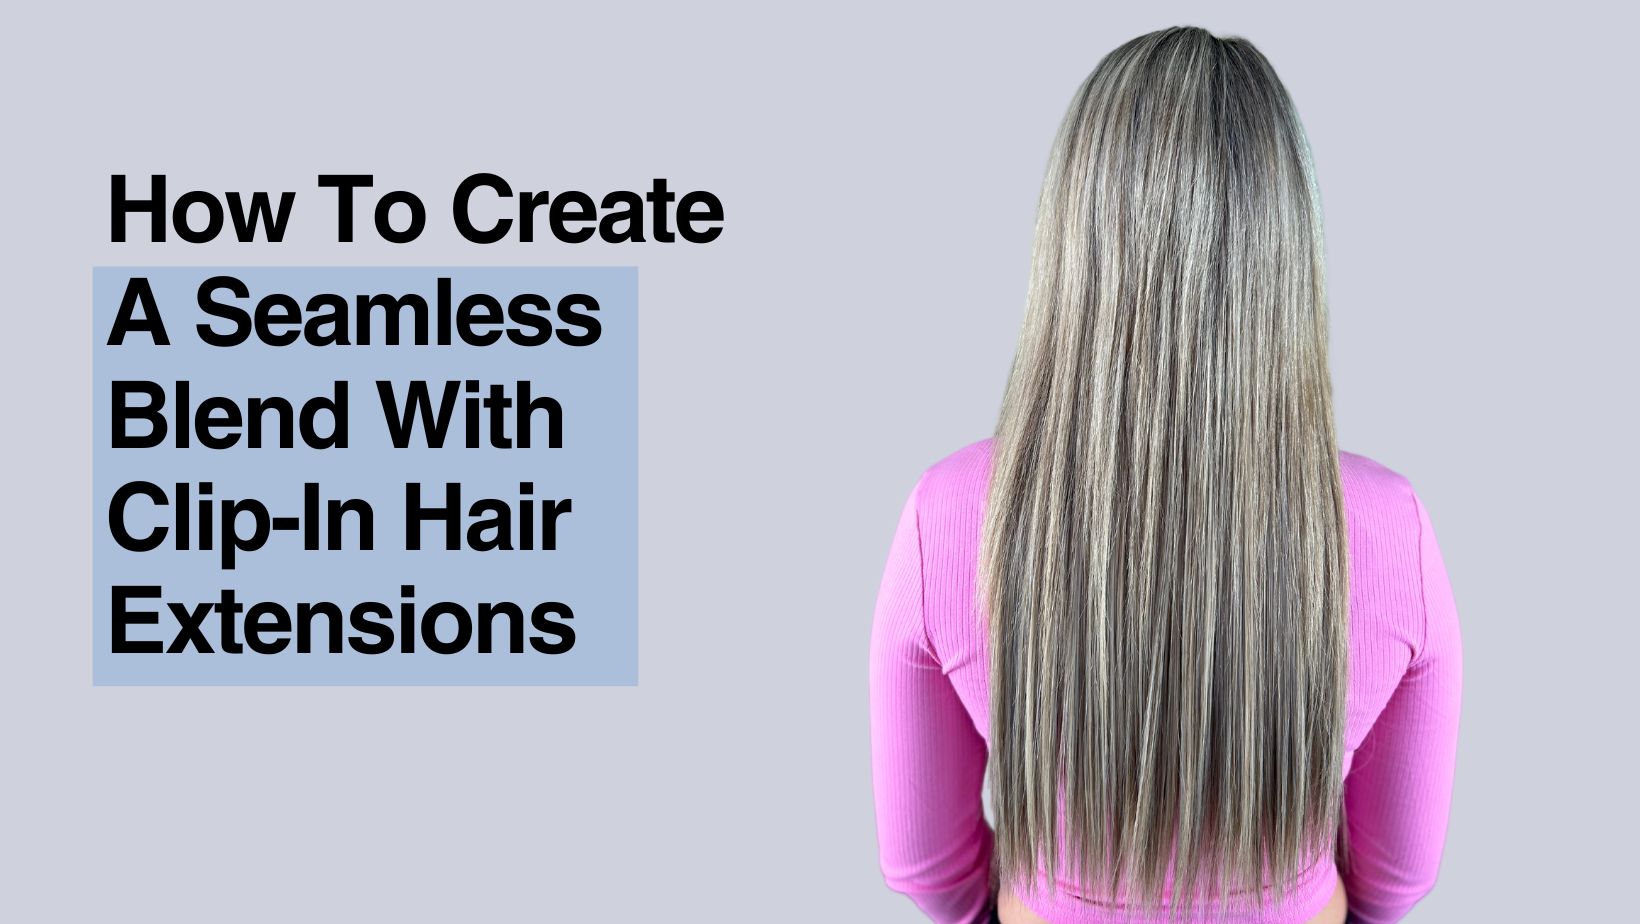 How to create a seamless blend with clip-in extensions